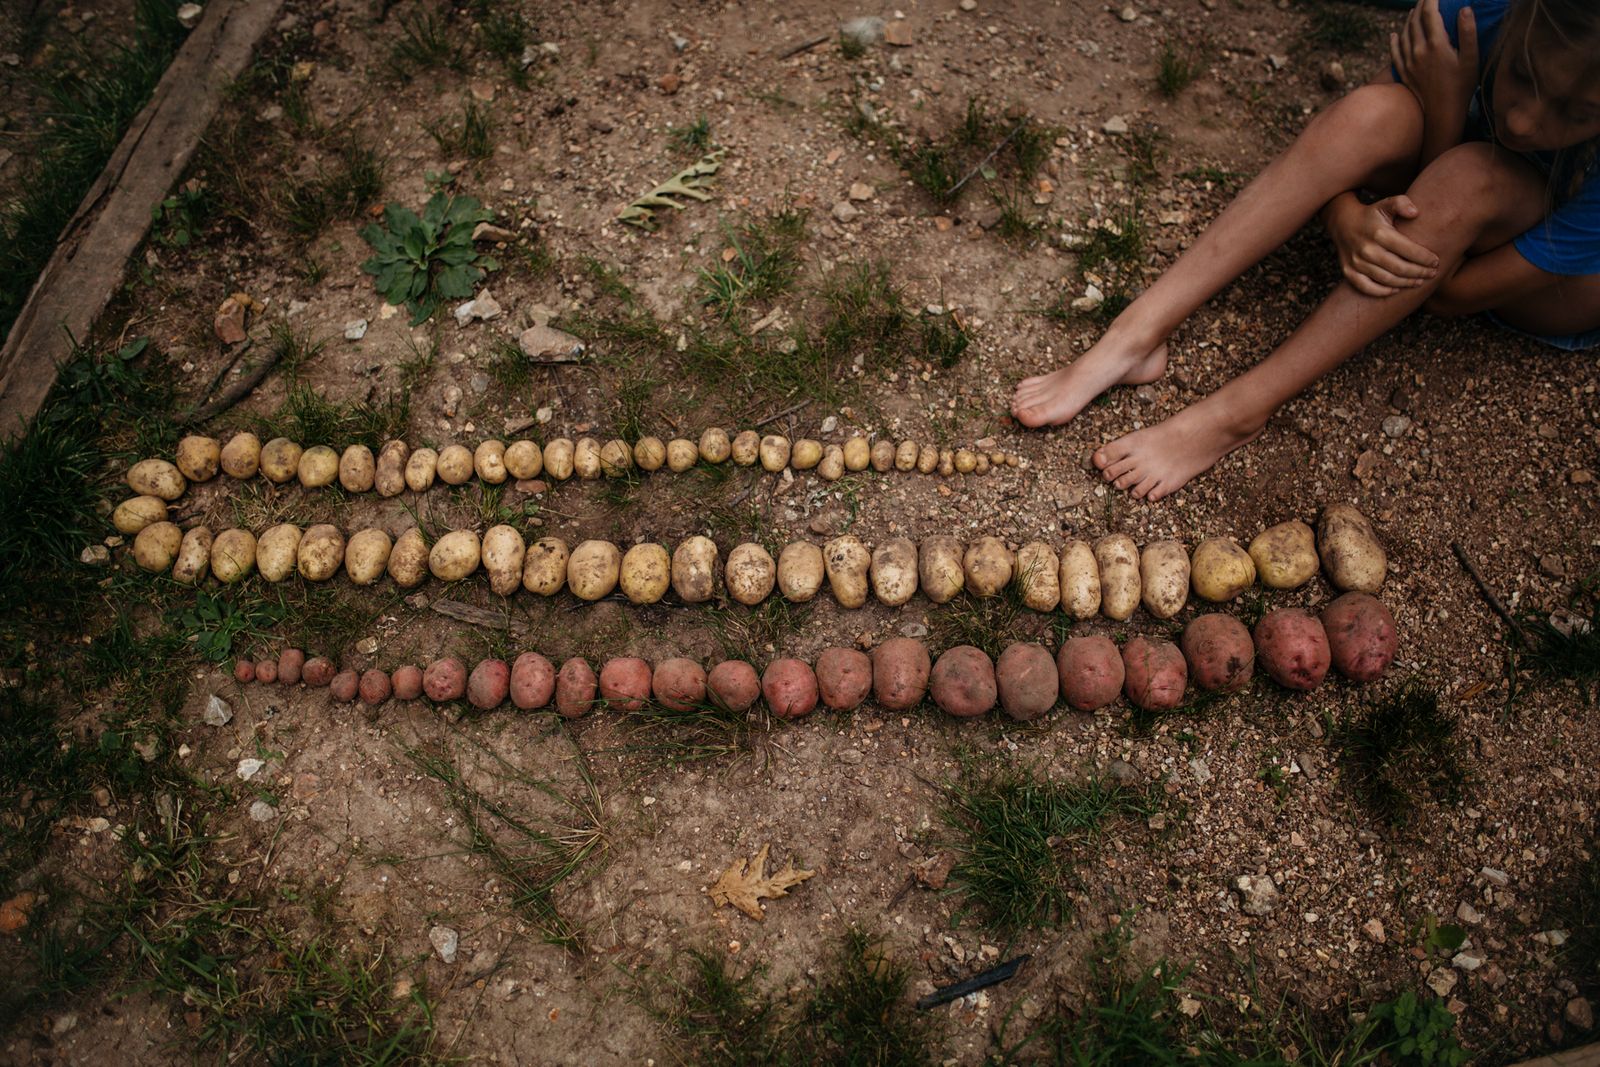 © Terra Fondriest - After harvesting some of the potatoes from our garden, my daughter and I lined them up by size just for fun.